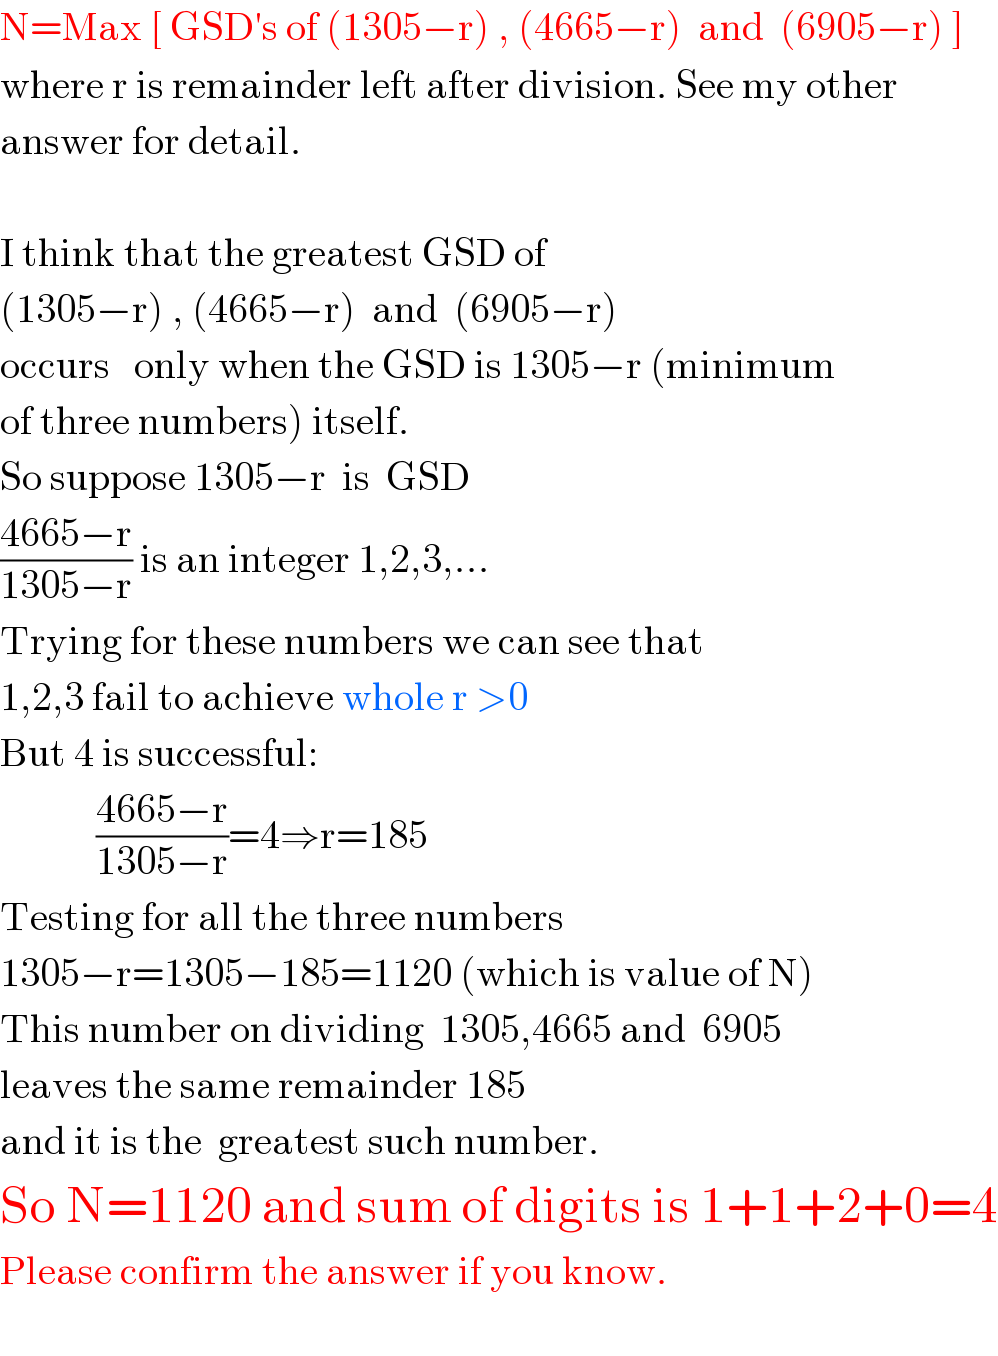 N=Max [ GSD′s of (1305−r) , (4665−r)  and  (6905−r) ]  where r is remainder left after division. See my other   answer for detail.    I think that the greatest GSD of  (1305−r) , (4665−r)  and  (6905−r)   occurs   only when the GSD is 1305−r (minimum  of three numbers) itself.  So suppose 1305−r  is  GSD  ((4665−r)/(1305−r)) is an integer 1,2,3,...  Trying for these numbers we can see that  1,2,3 fail to achieve whole r >0  But 4 is successful:              ((4665−r)/(1305−r))=4⇒r=185  Testing for all the three numbers  1305−r=1305−185=1120 (which is value of N)  This number on dividing  1305,4665 and  6905  leaves the same remainder 185  and it is the  greatest such number.  So N=1120 and sum of digits is 1+1+2+0=4  Please confirm the answer if you know.    